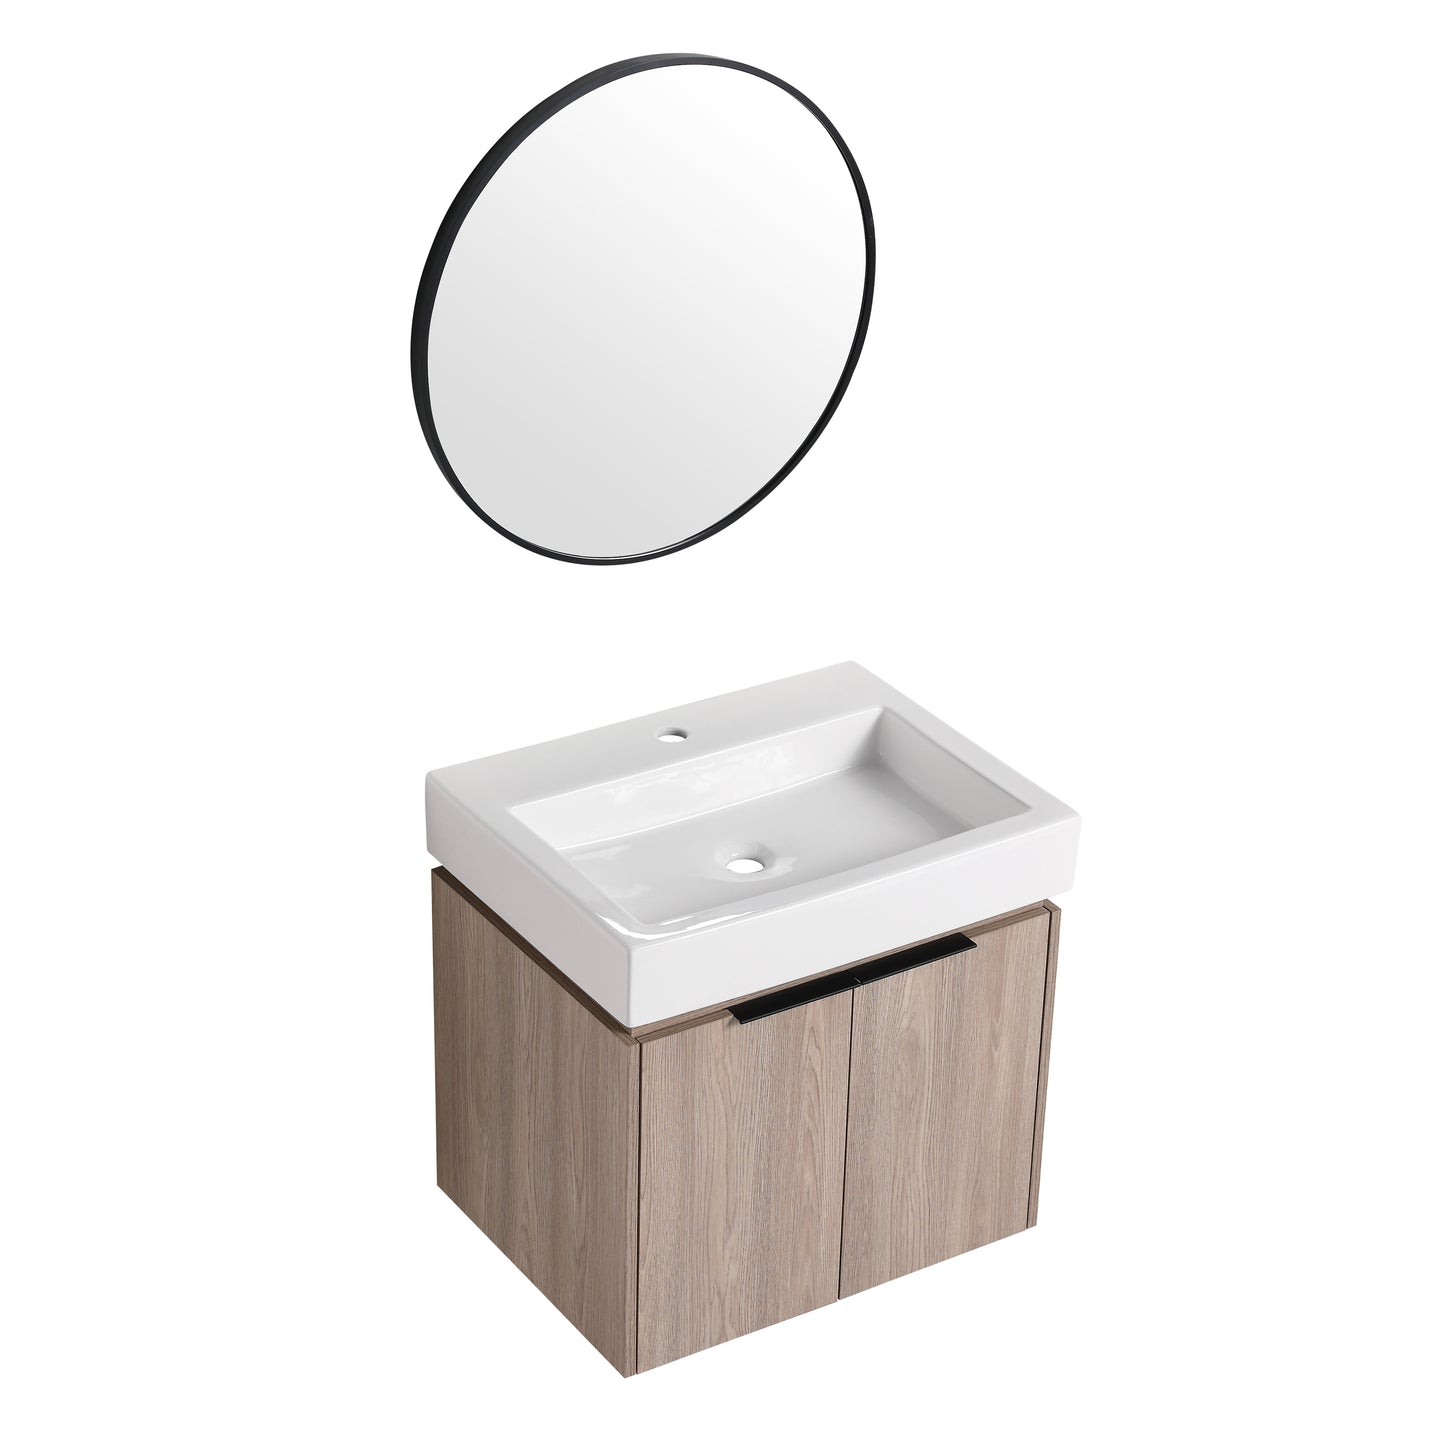 24 Inch Bathroom Vanity With Ceramic Basin  （KD-Packing）